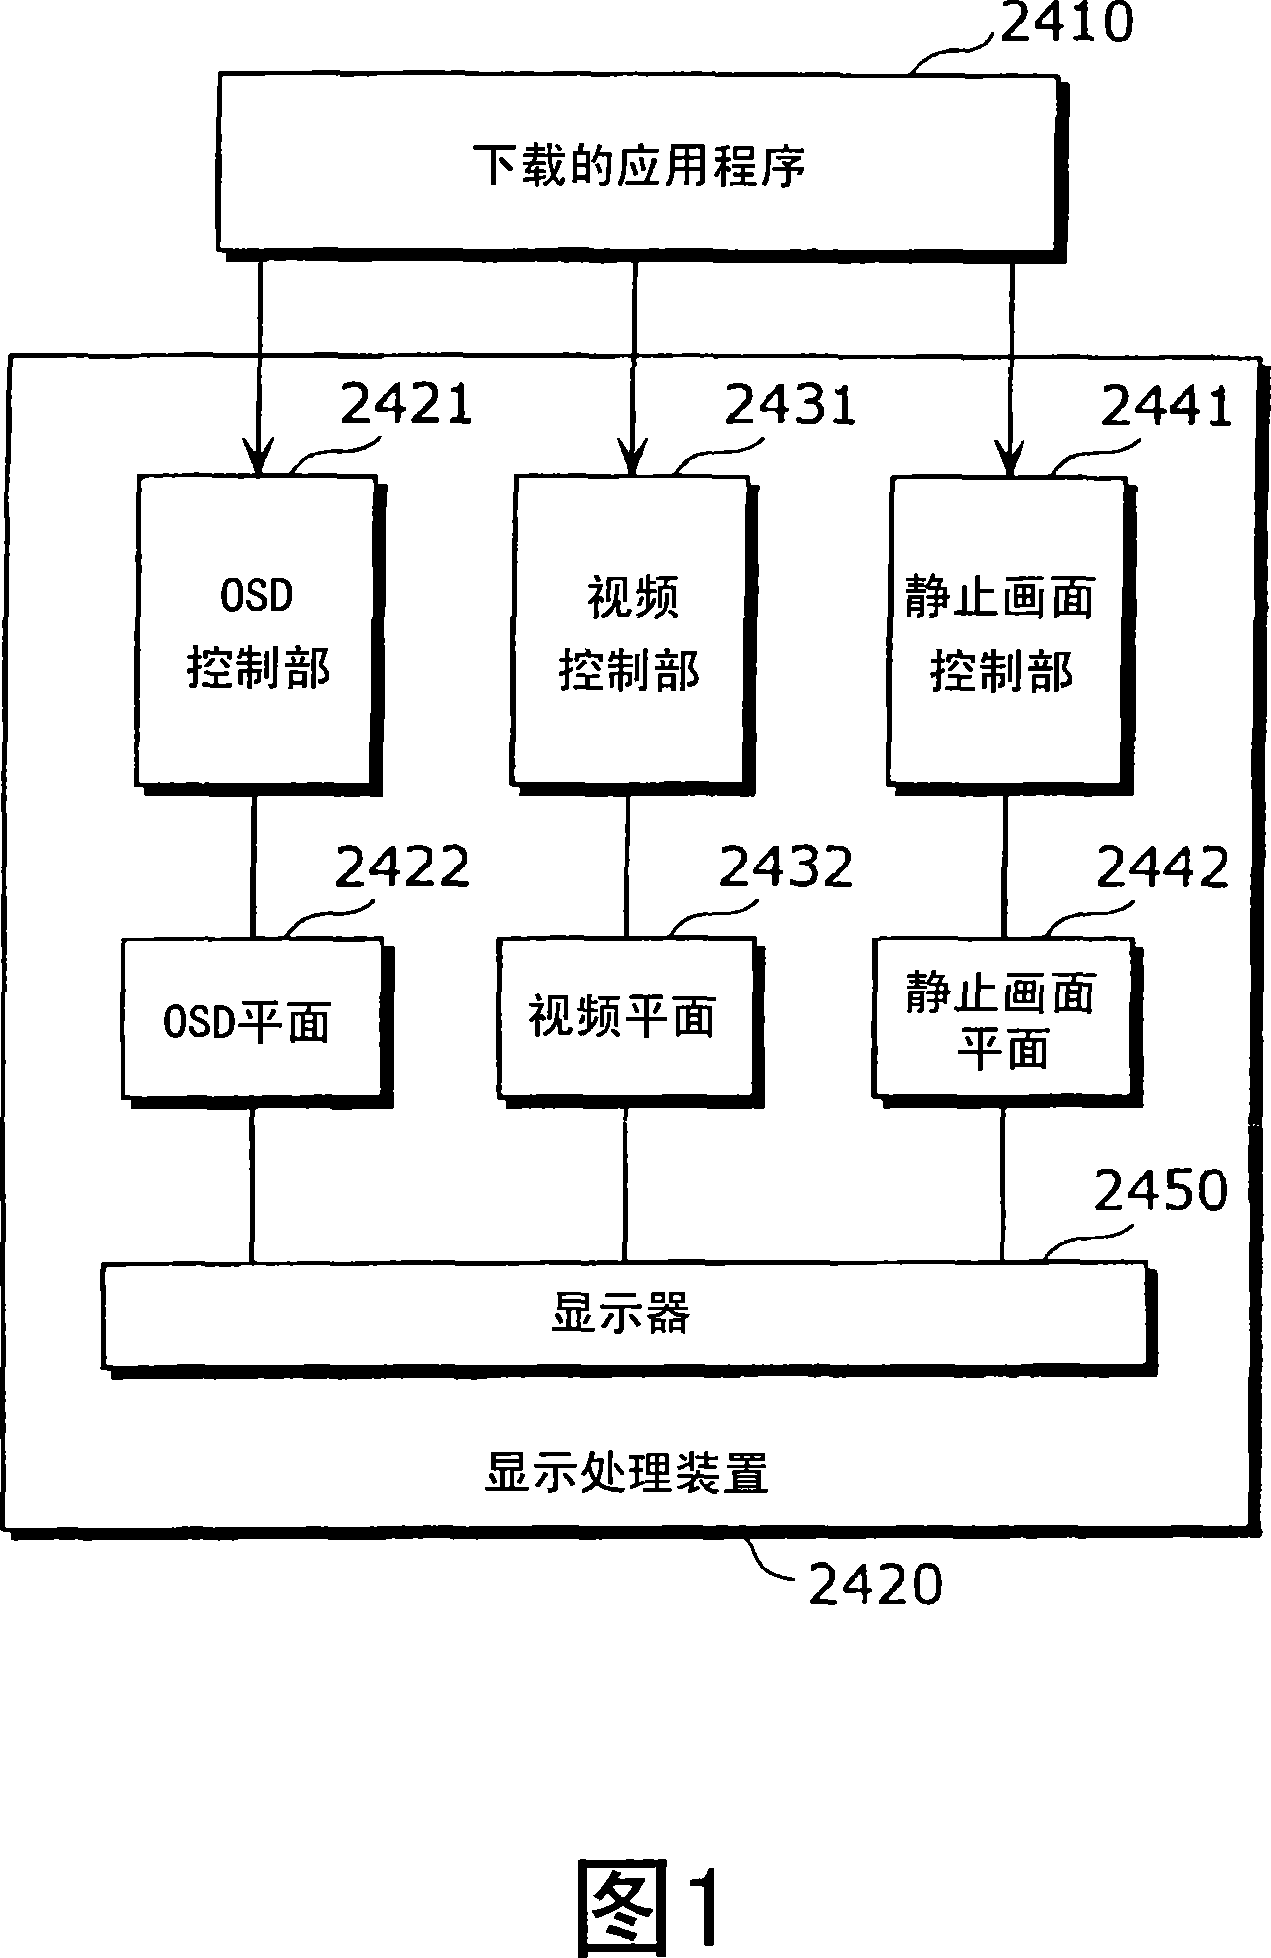 Display processing device